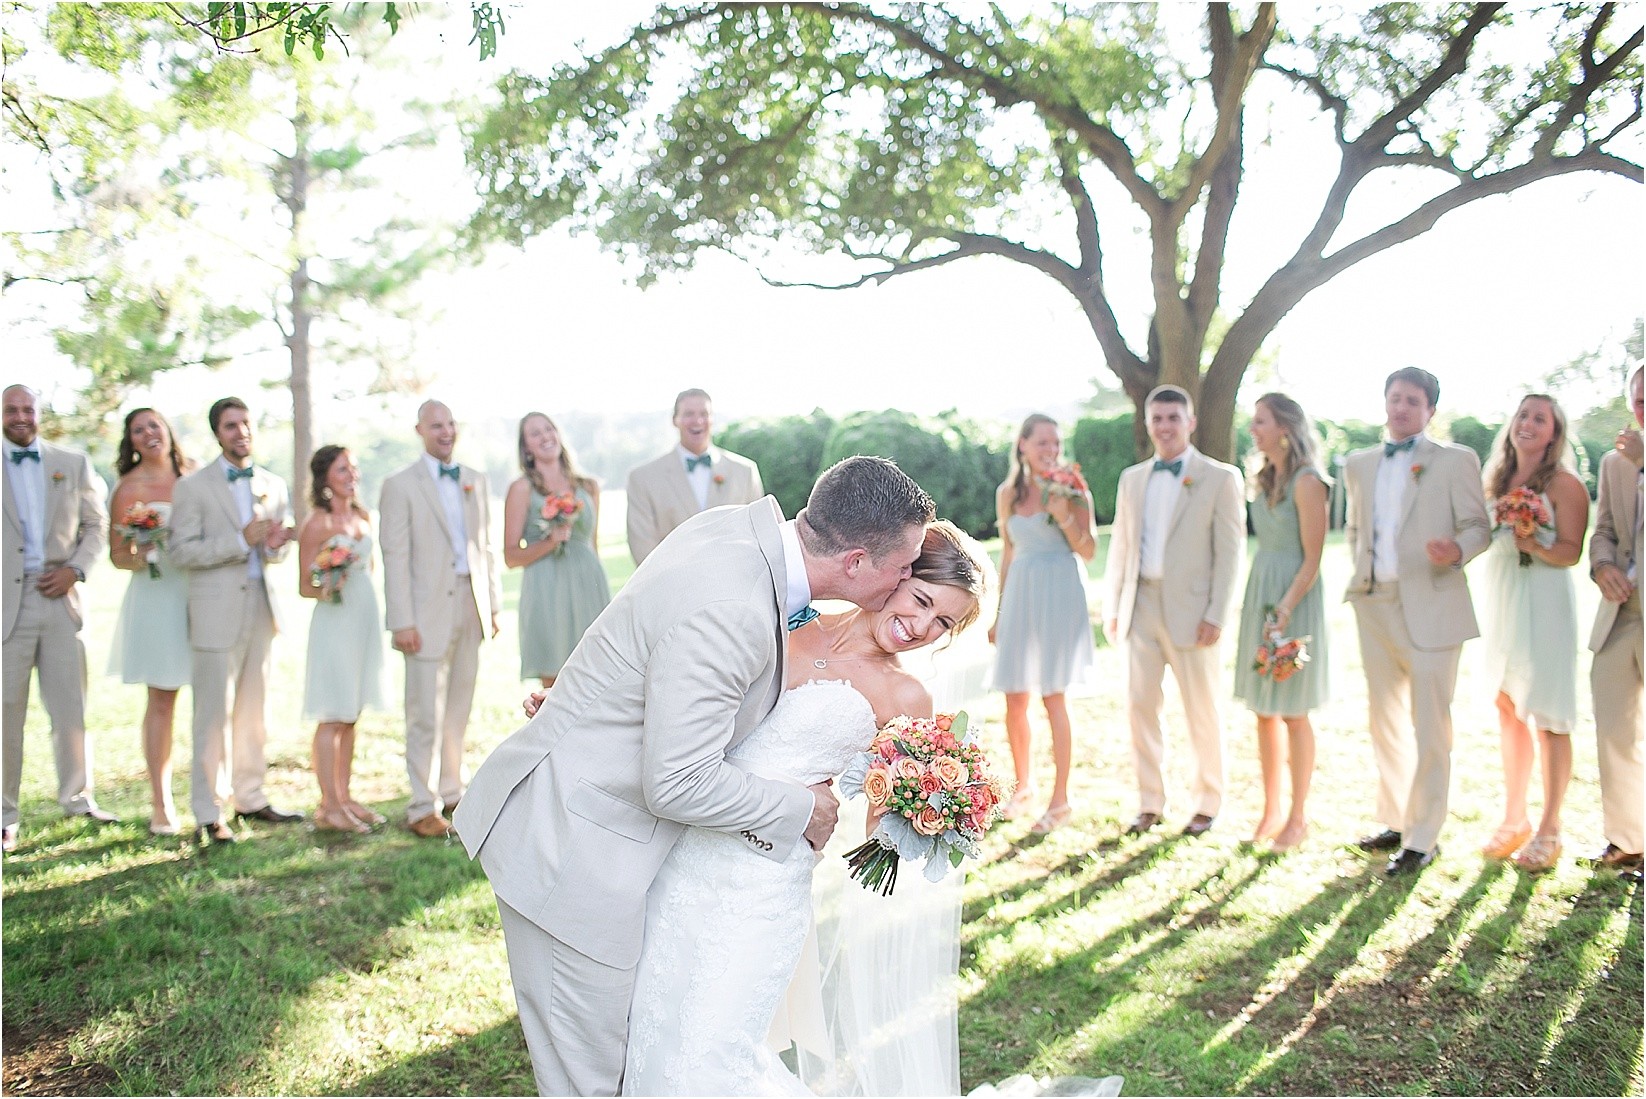 kissing in front of the bridal party during their wedding at the Historic Rural Hill wedding ceremony and reception in Huntersville nc